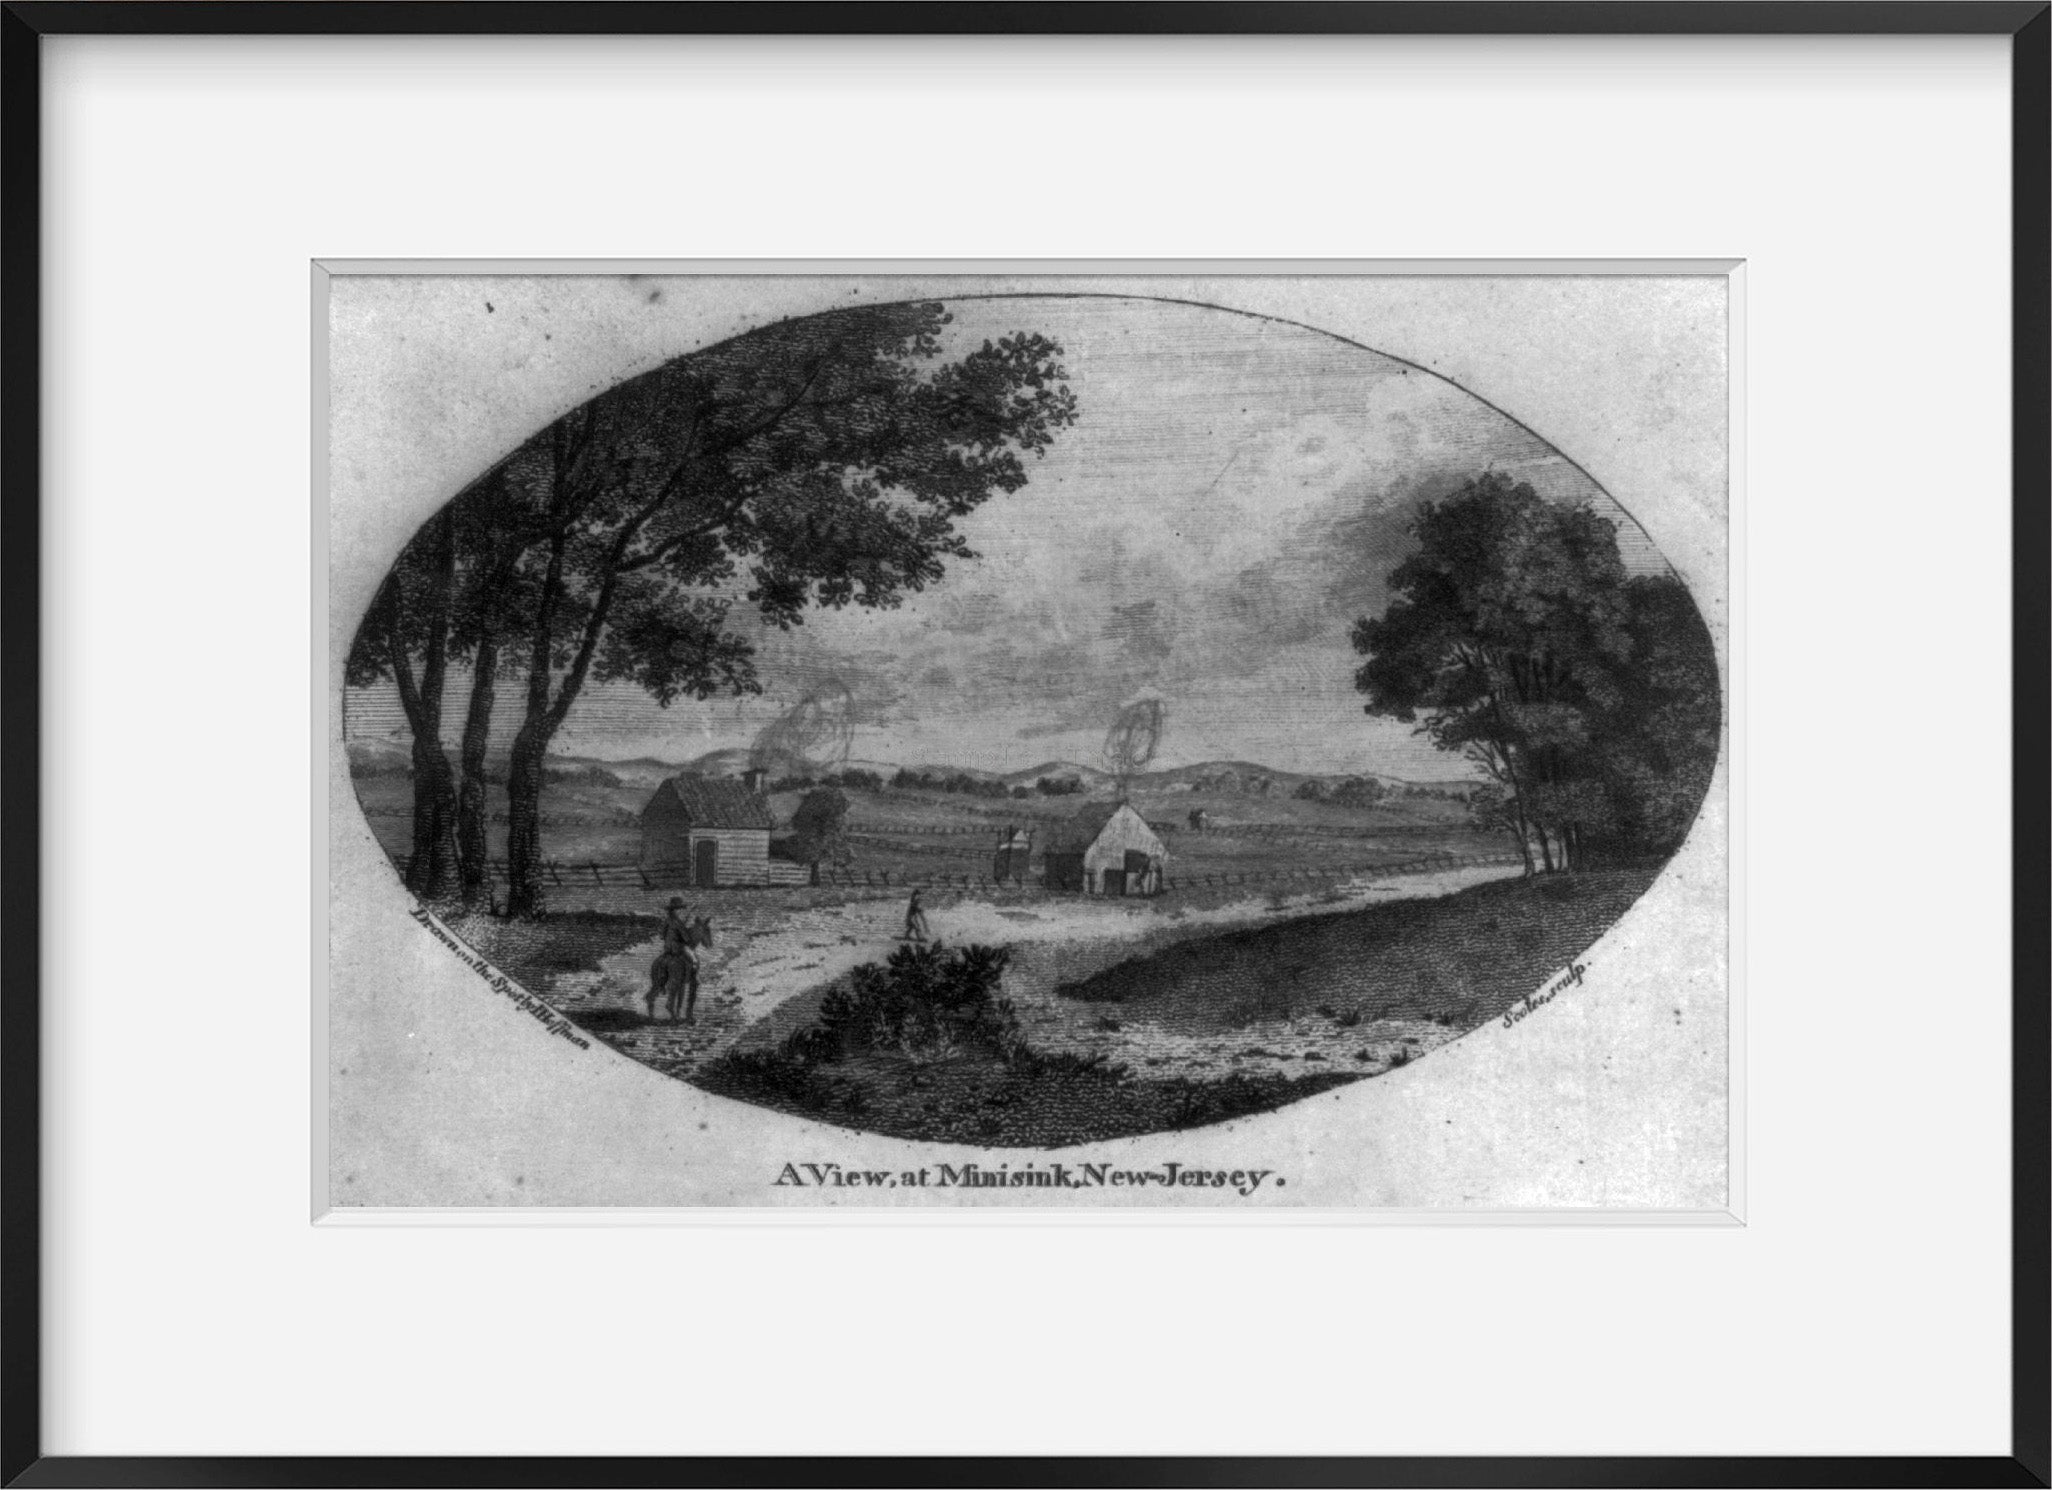 Vintage 1794 print: View at Minisink, New Jersey